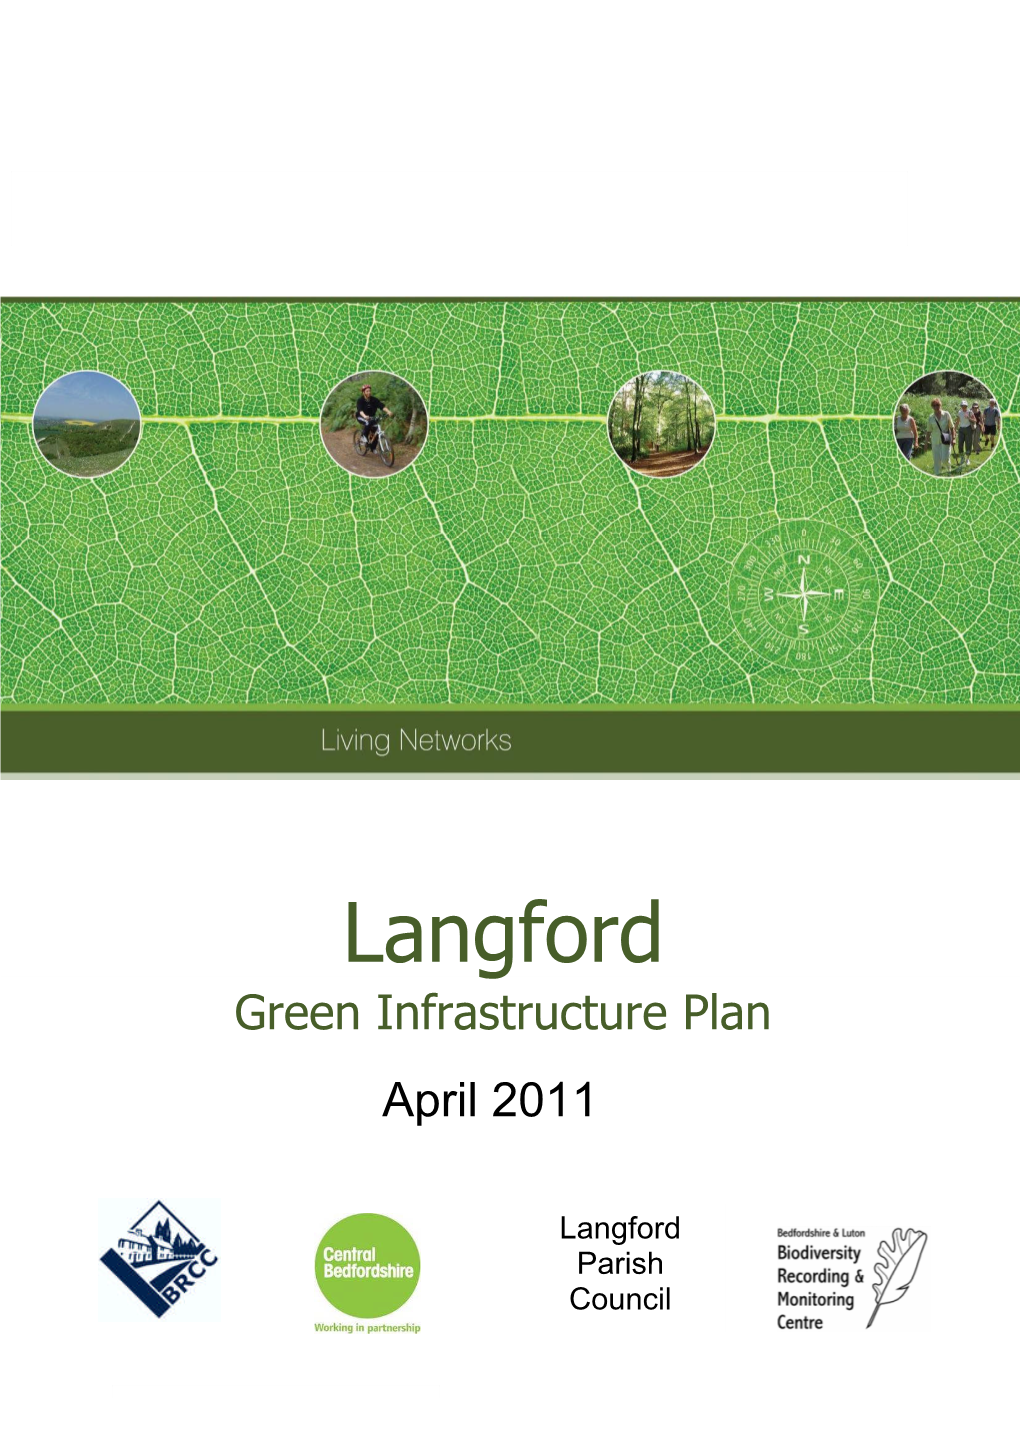 Langford GI Plan, Will Be Used by the Authority in Considering Development Proposals and Assisting with the Creation of Green Infrastructure Assets